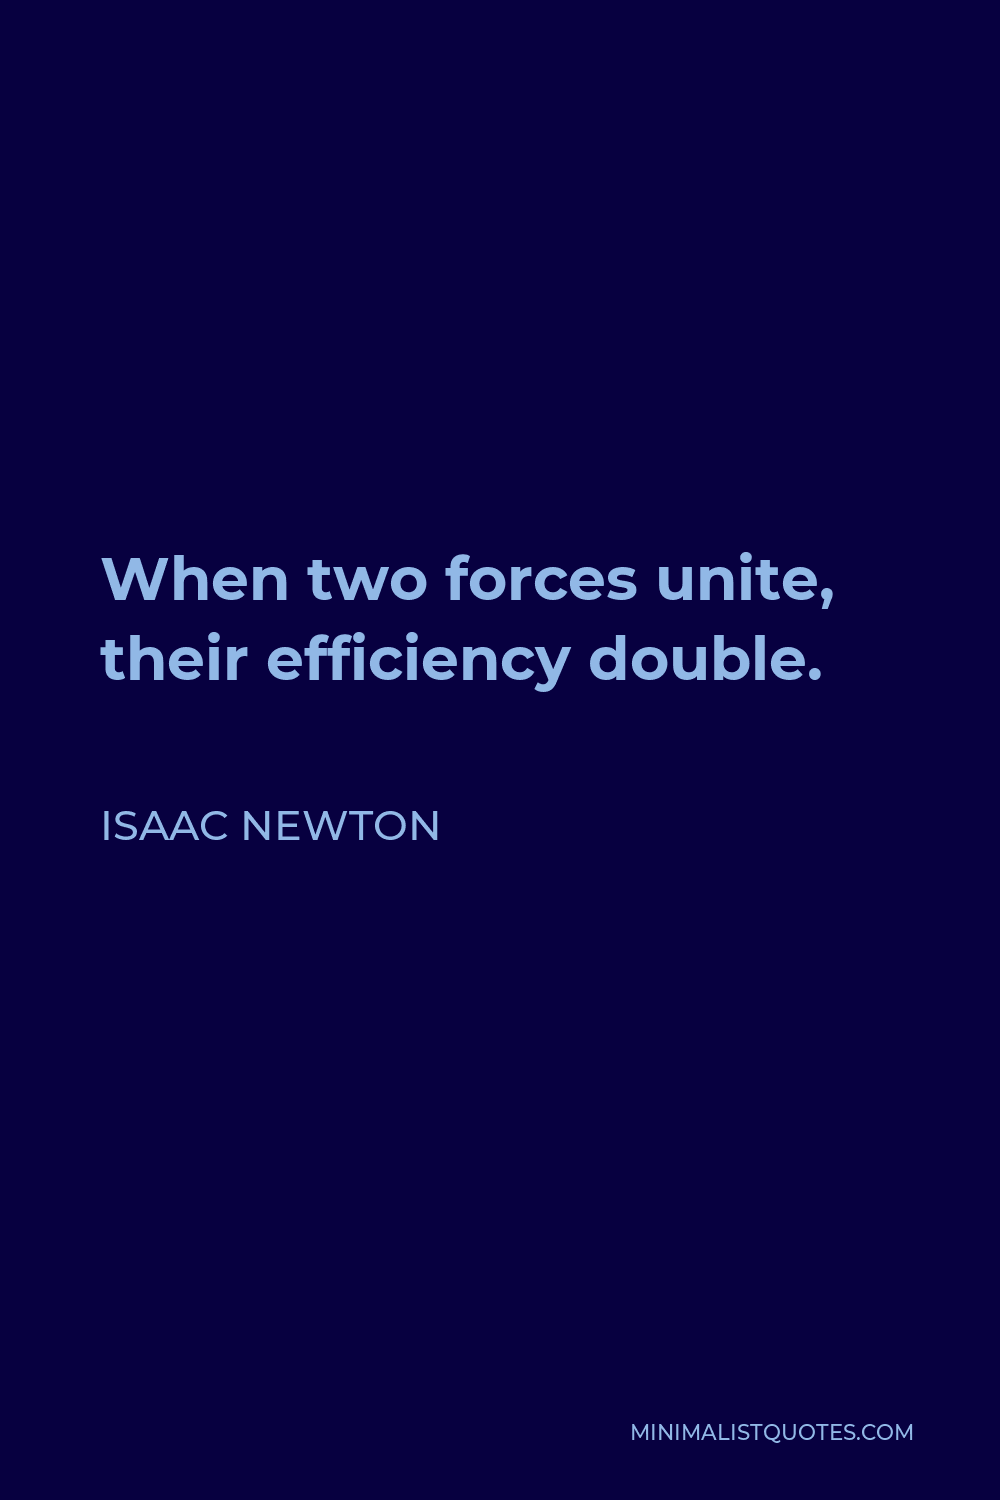 Isaac Newton Quote - When two forces unite, their efficiency double.